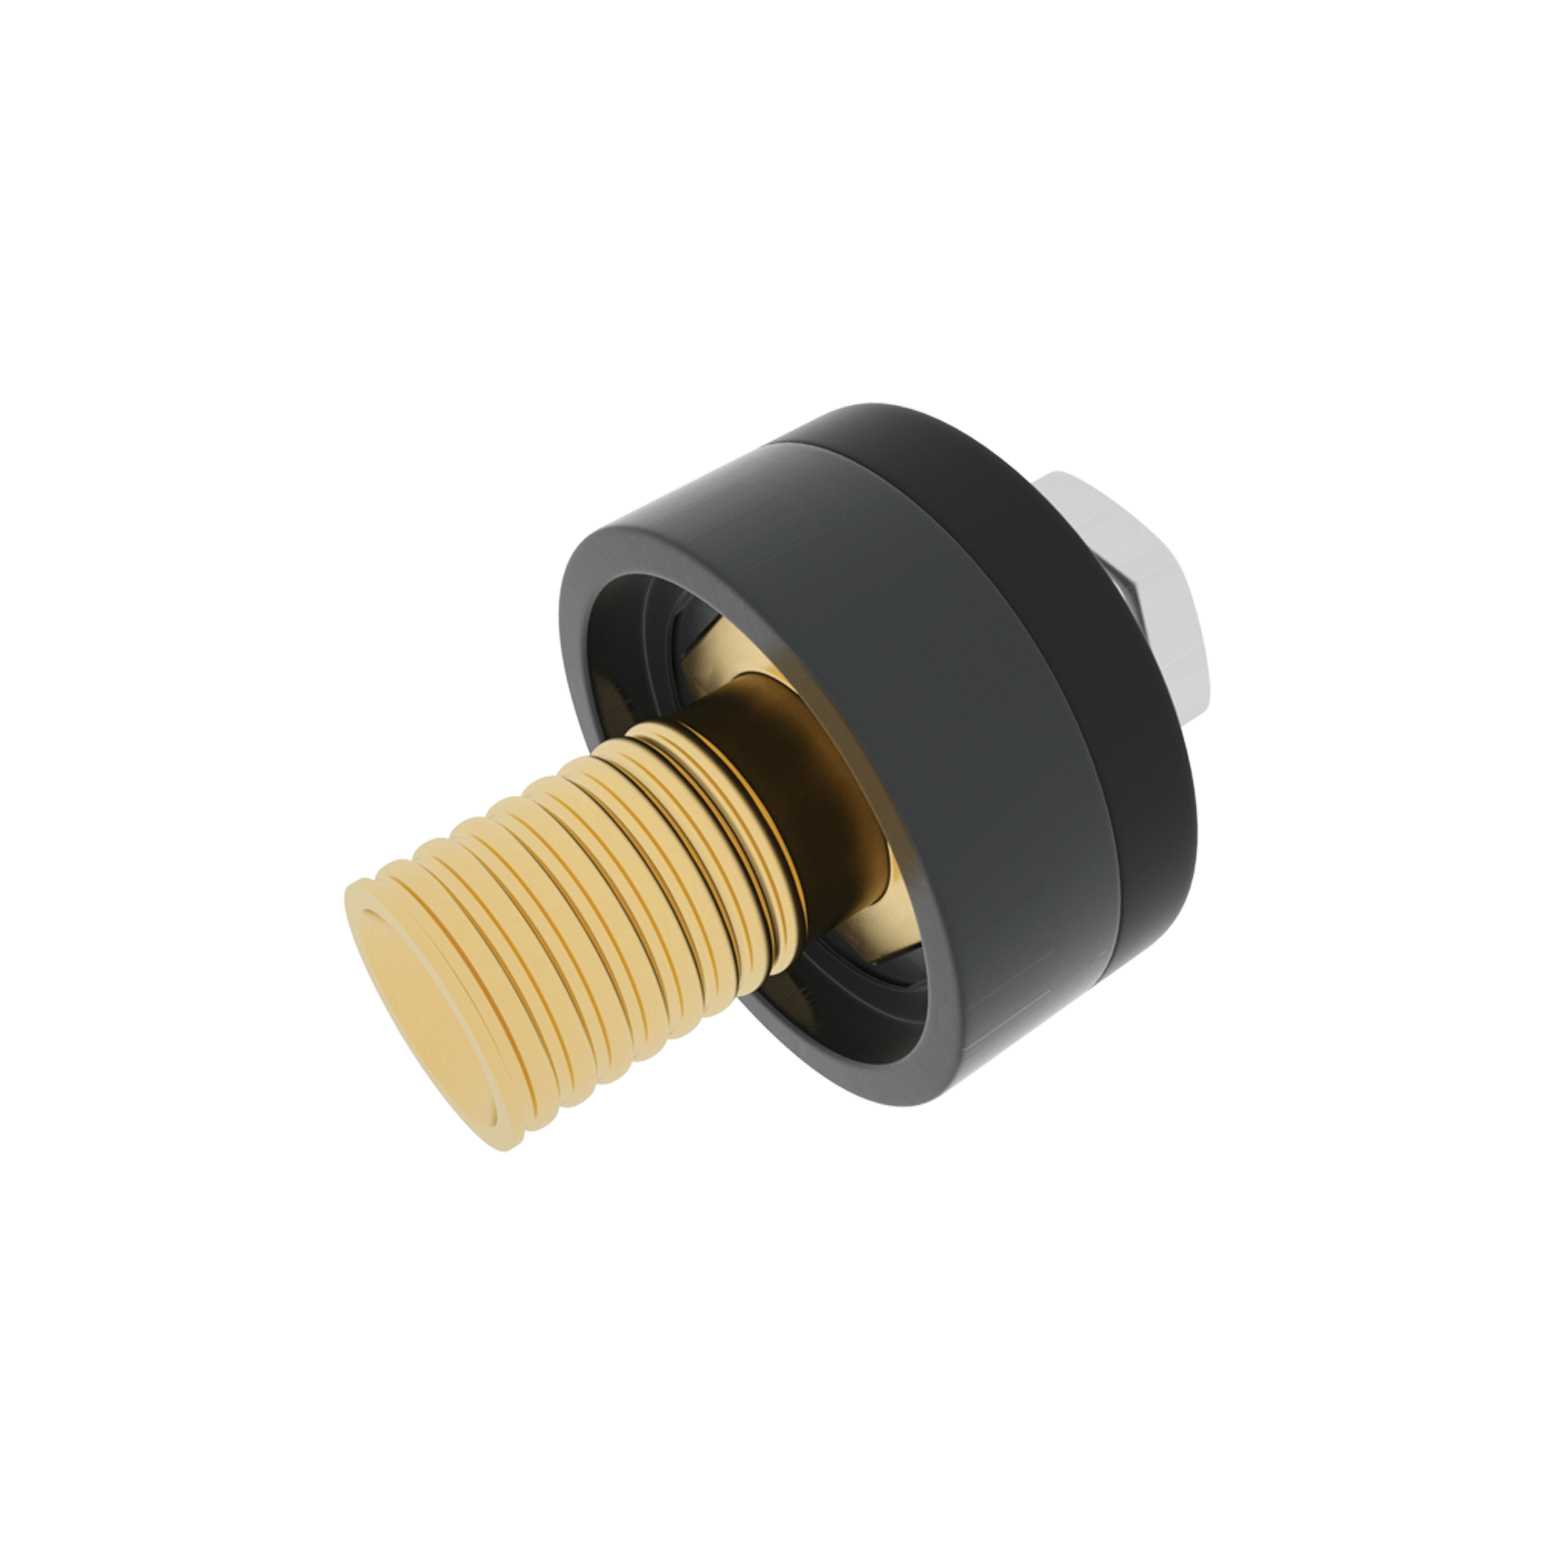 Get Star Weld Thai Style Cable Connector-Socket